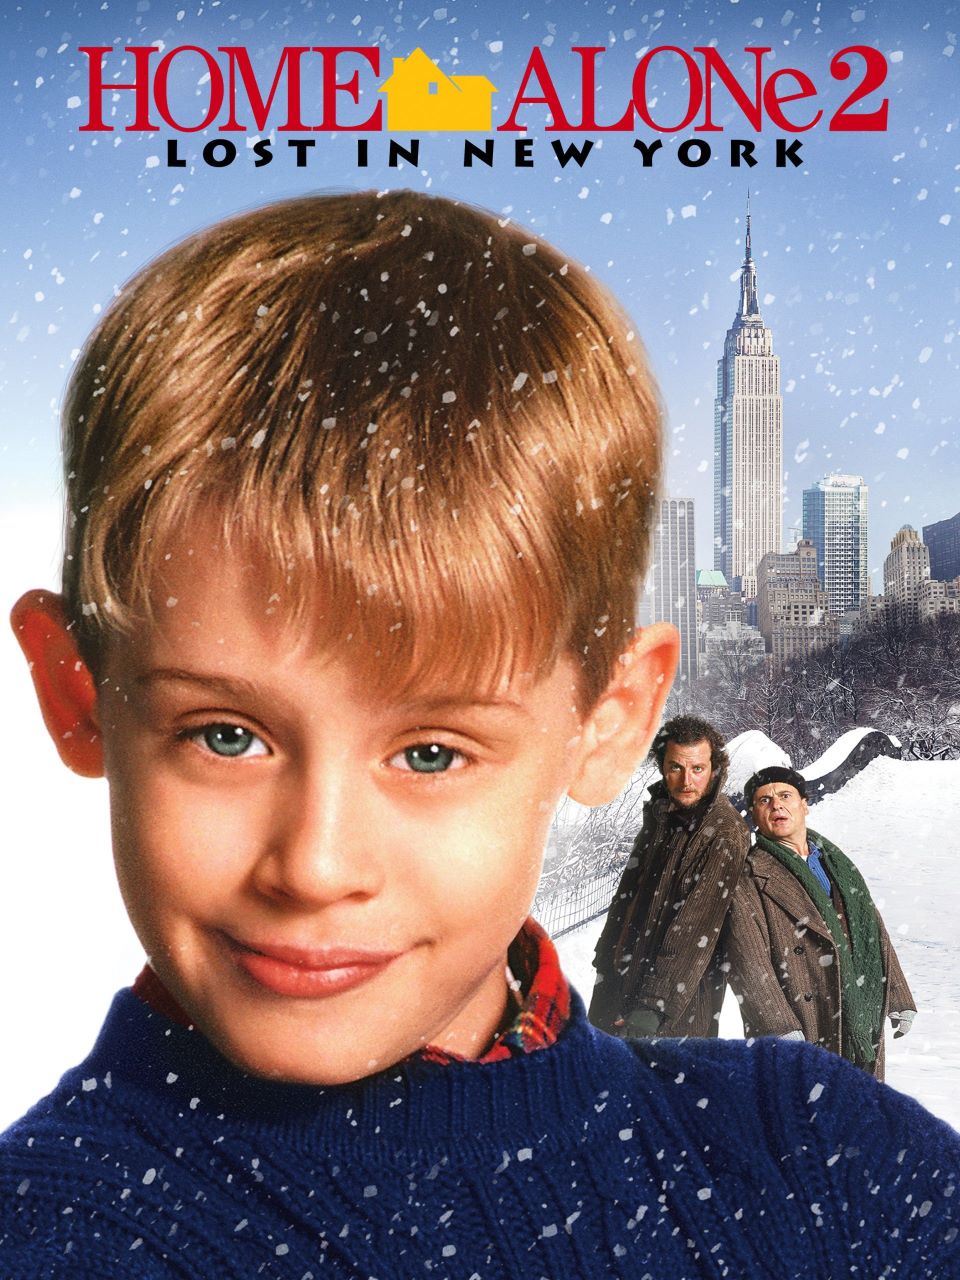 Home Alone 2 Lost in New York Film Times and Info SHOWCASE